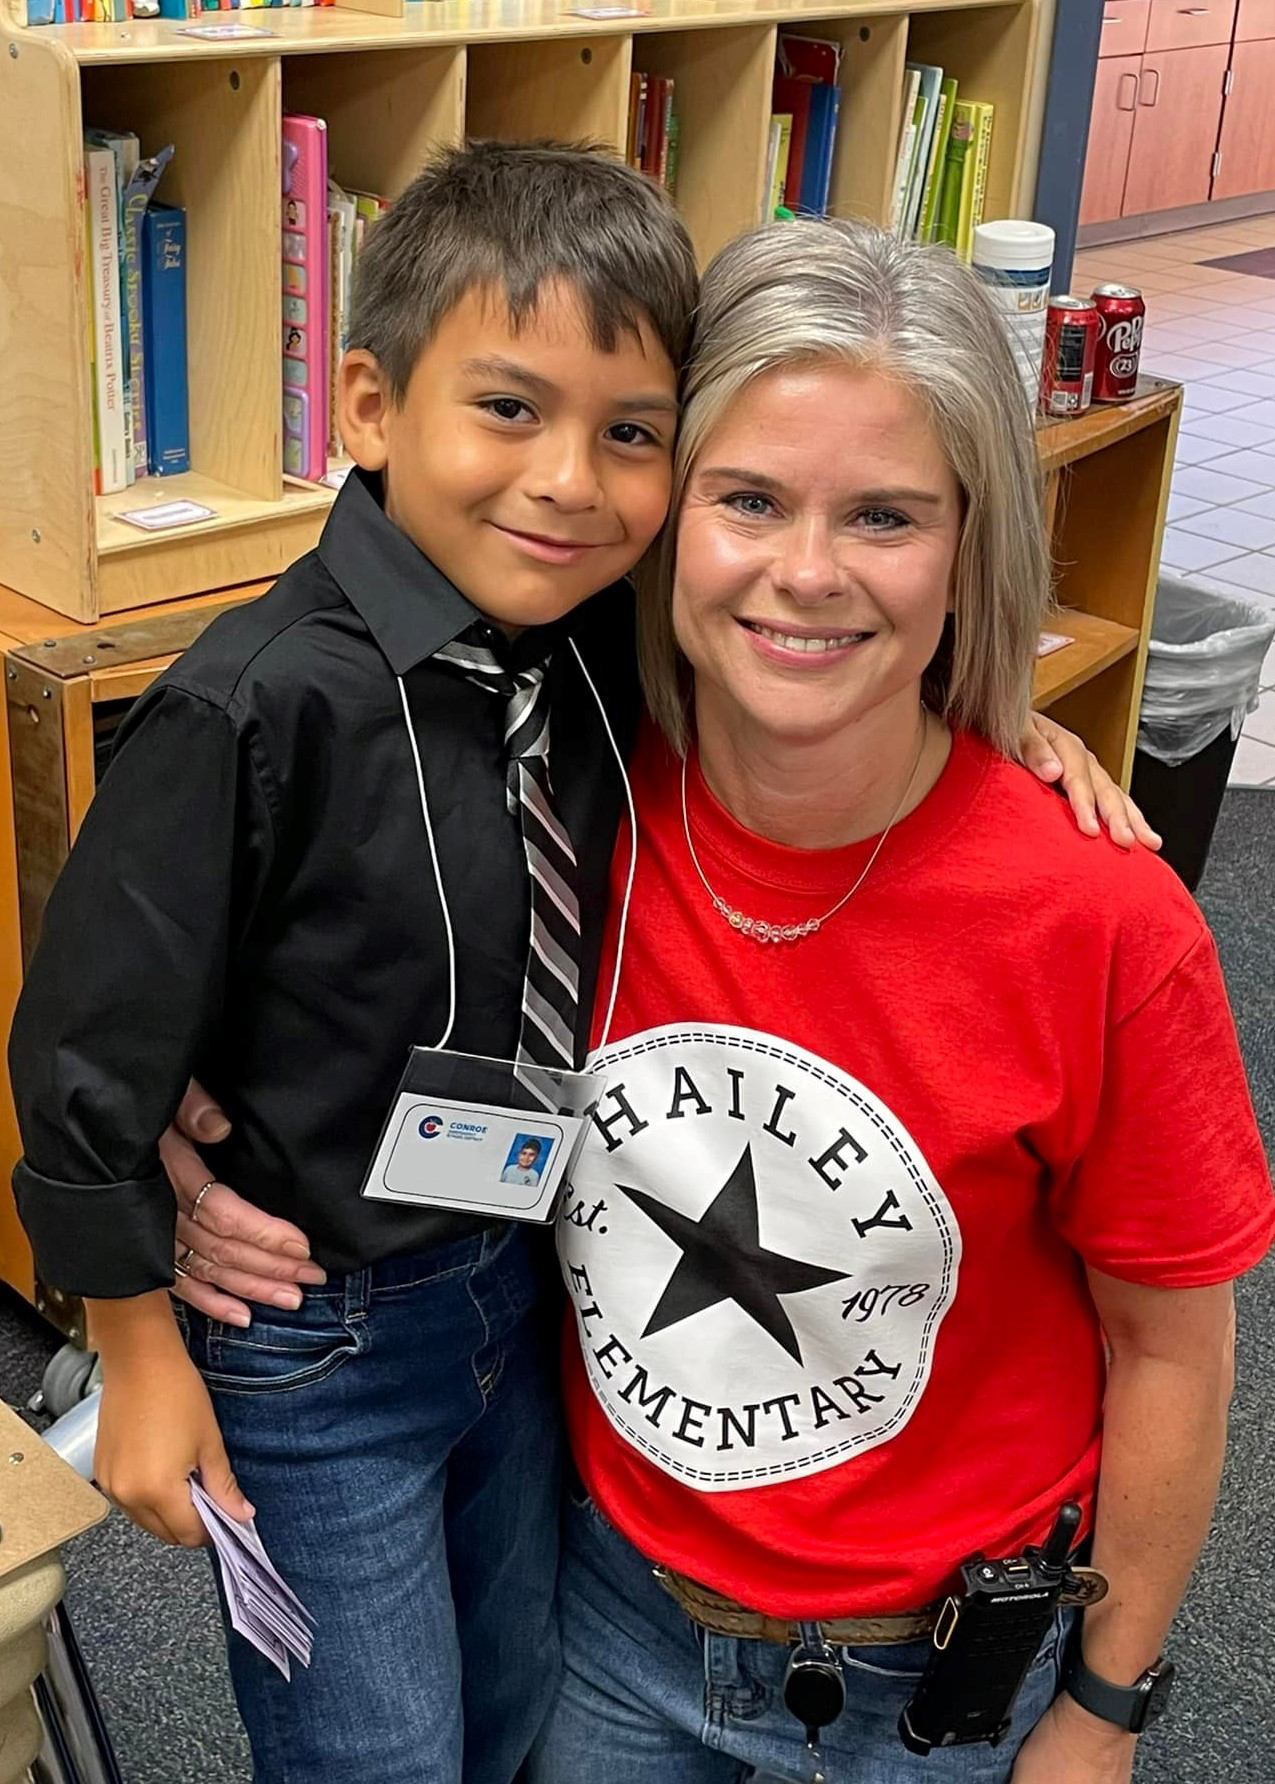 A student at Hailey had the opportunity to be Principal for the Day!